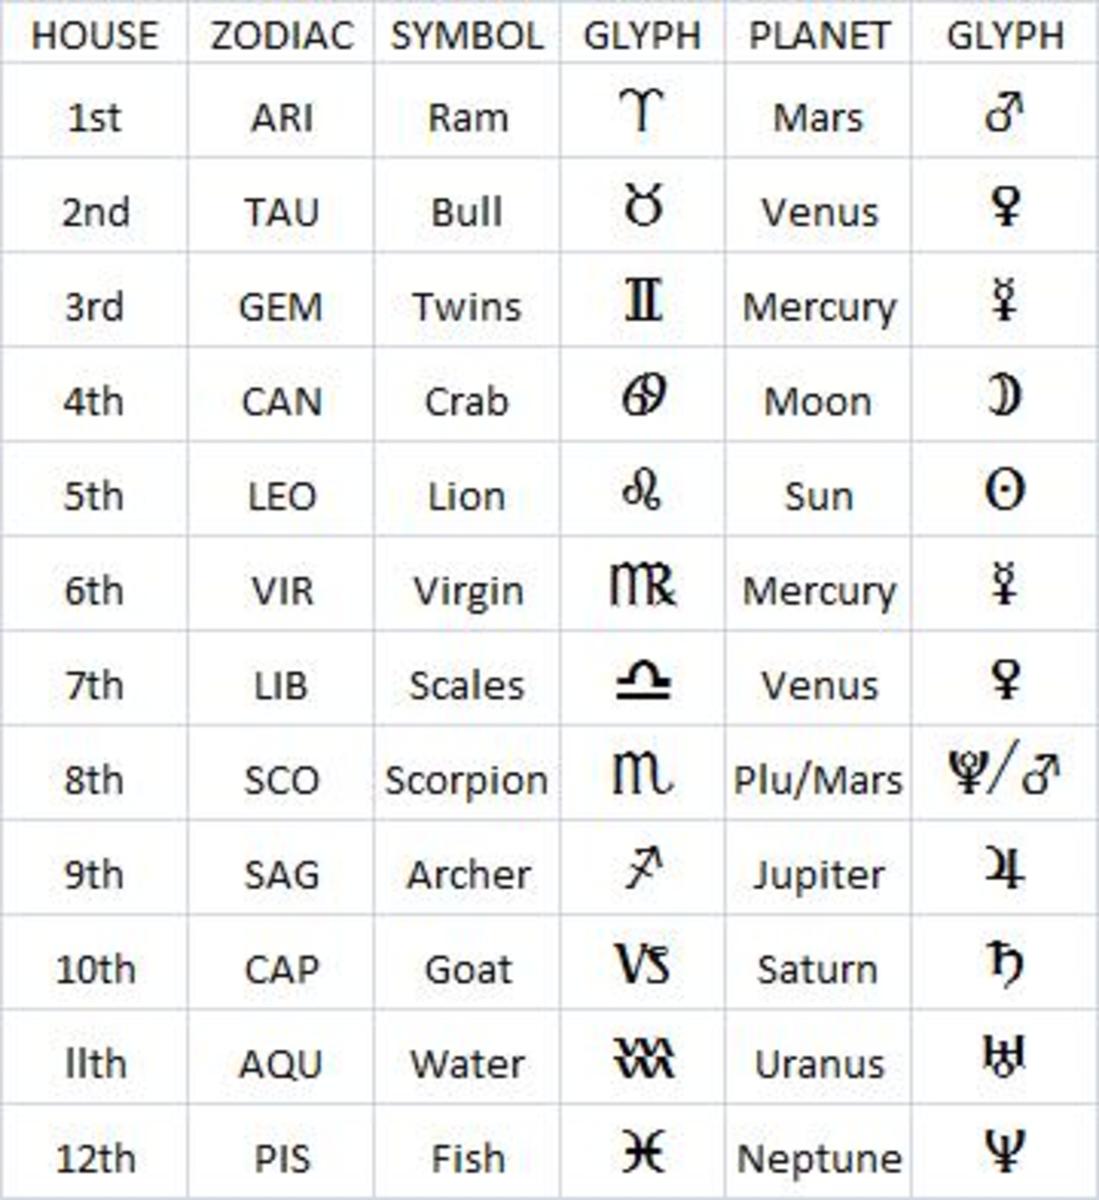 The zodiac signs, planets, and glyphs